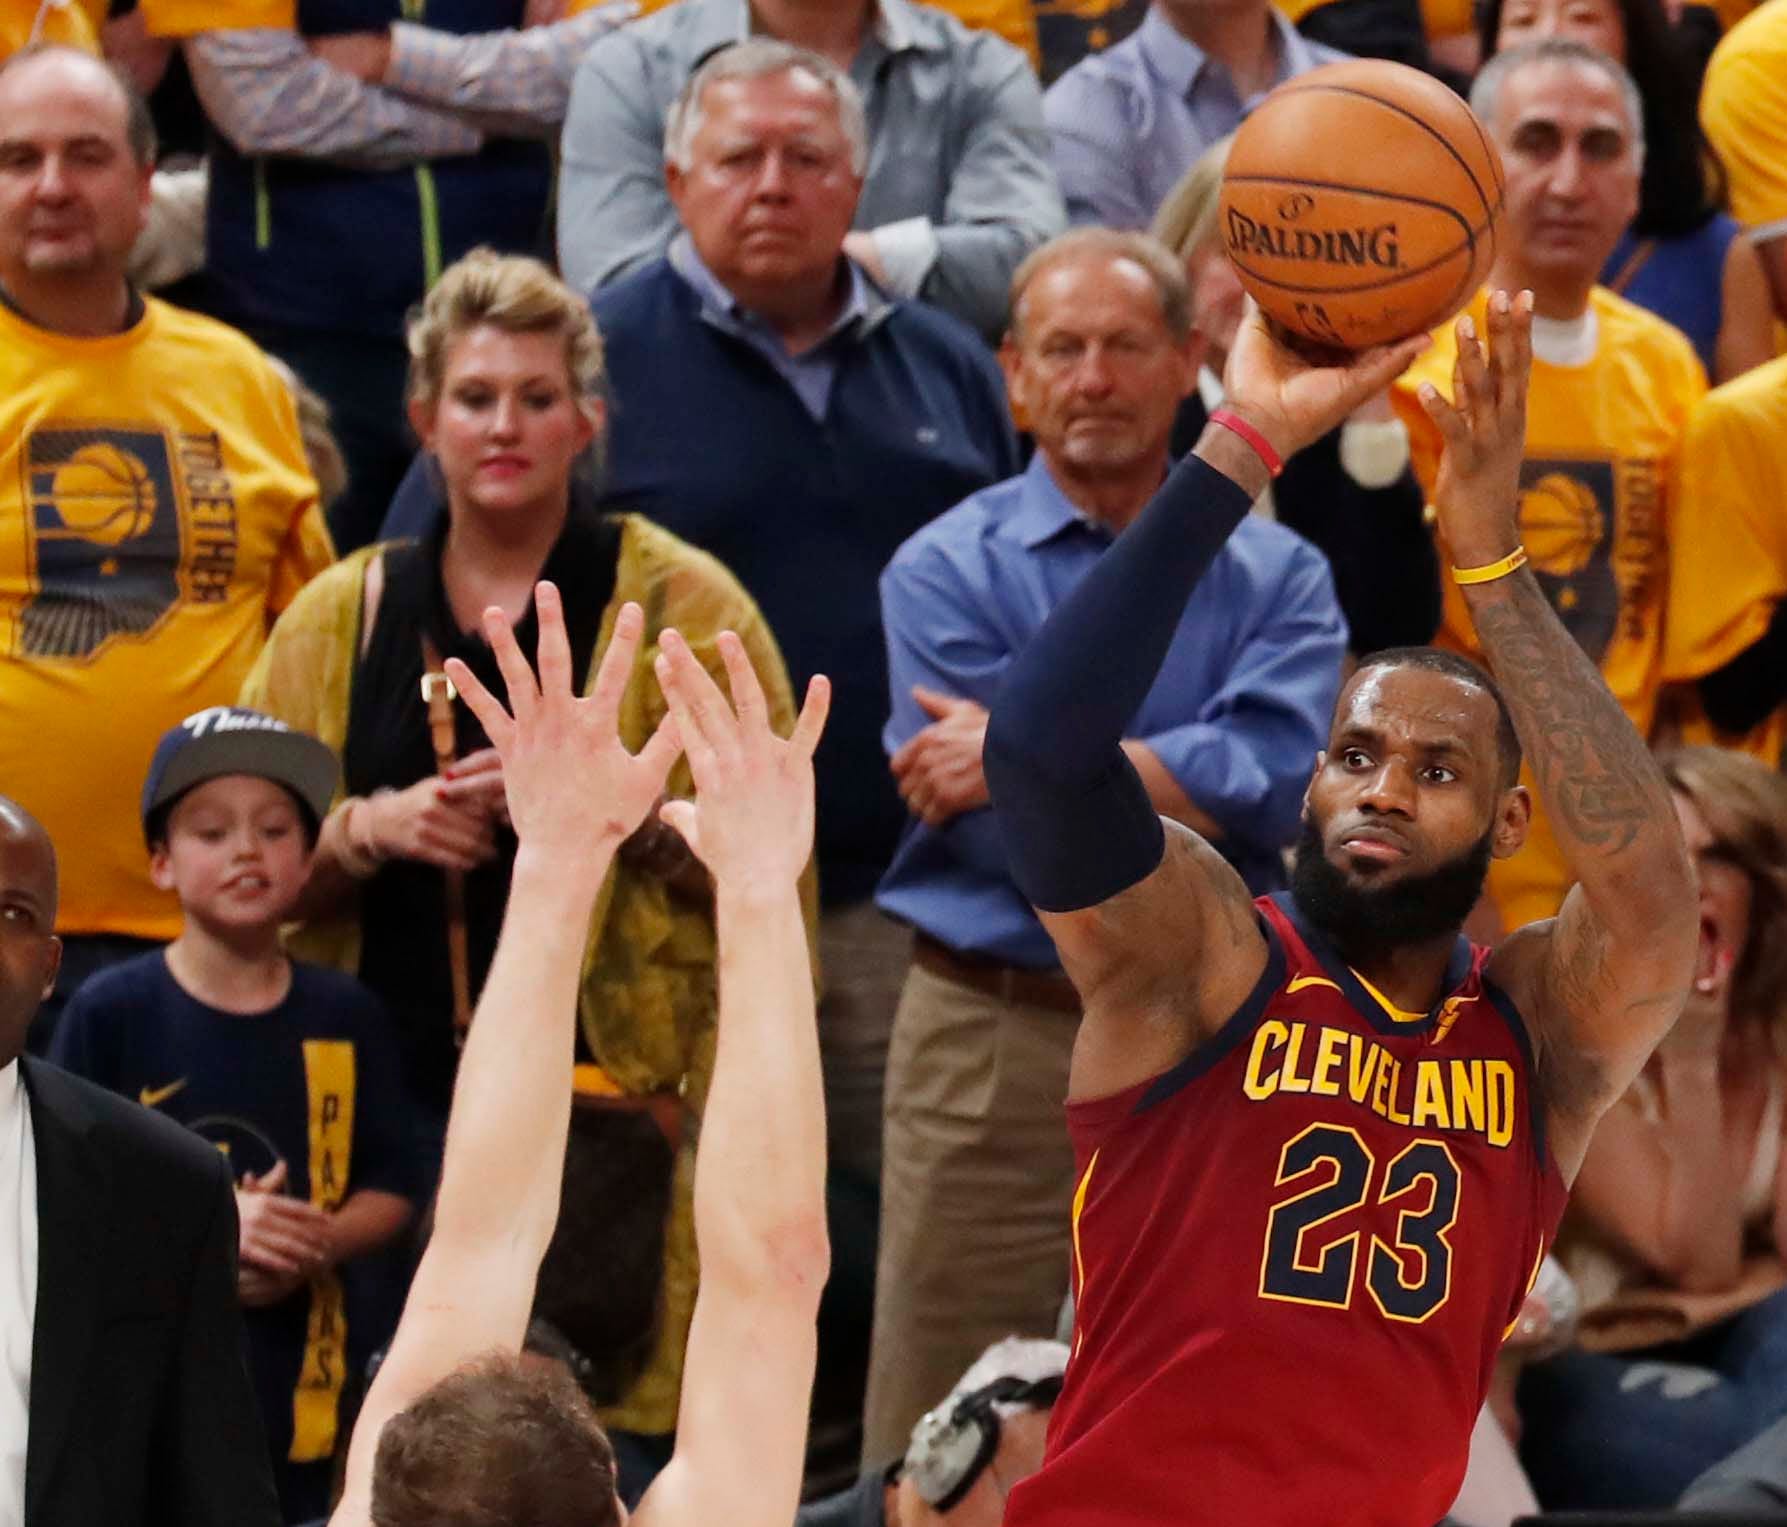 Cleveland Cavaliers forward LeBron James makes a three-point shot against Indiana Pacers forward Bojan Bogdanovic during the 4th quarter in Game 3.